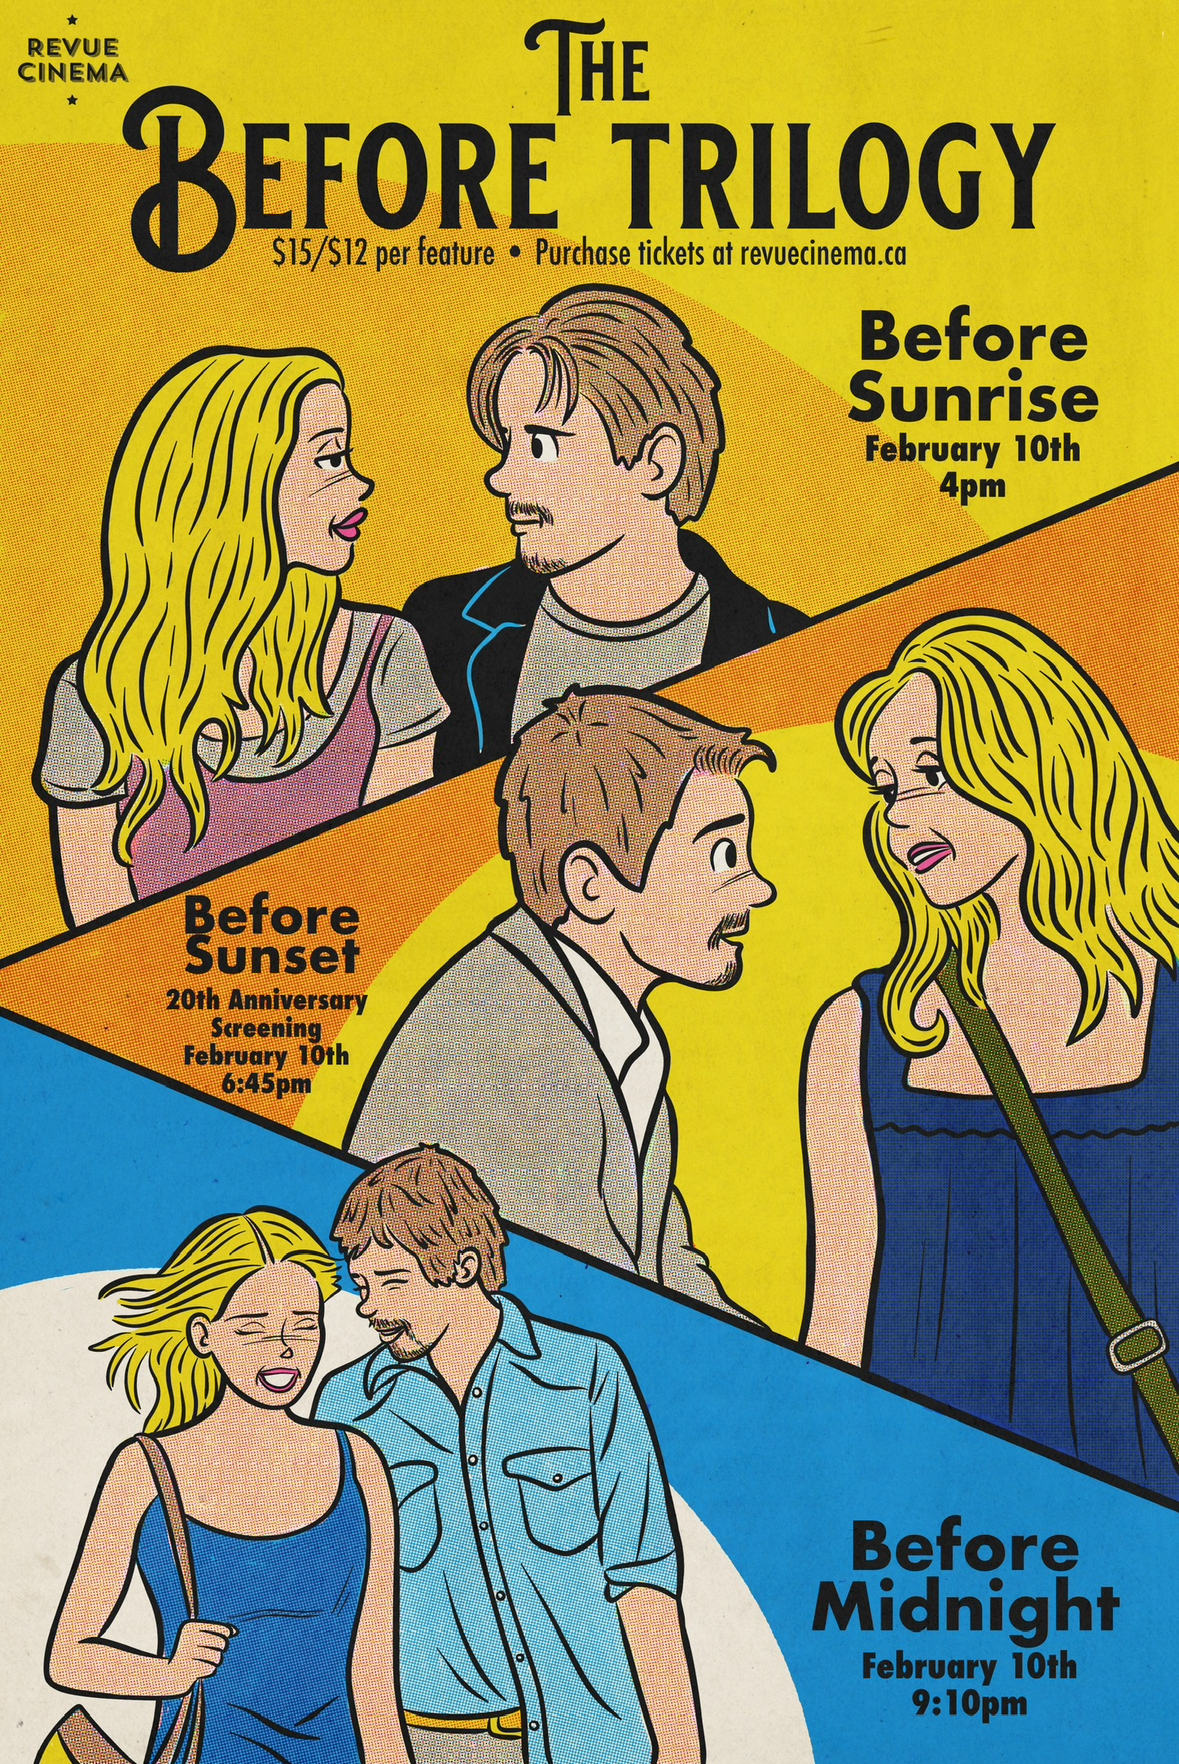 The Before Trilogy alternative poster